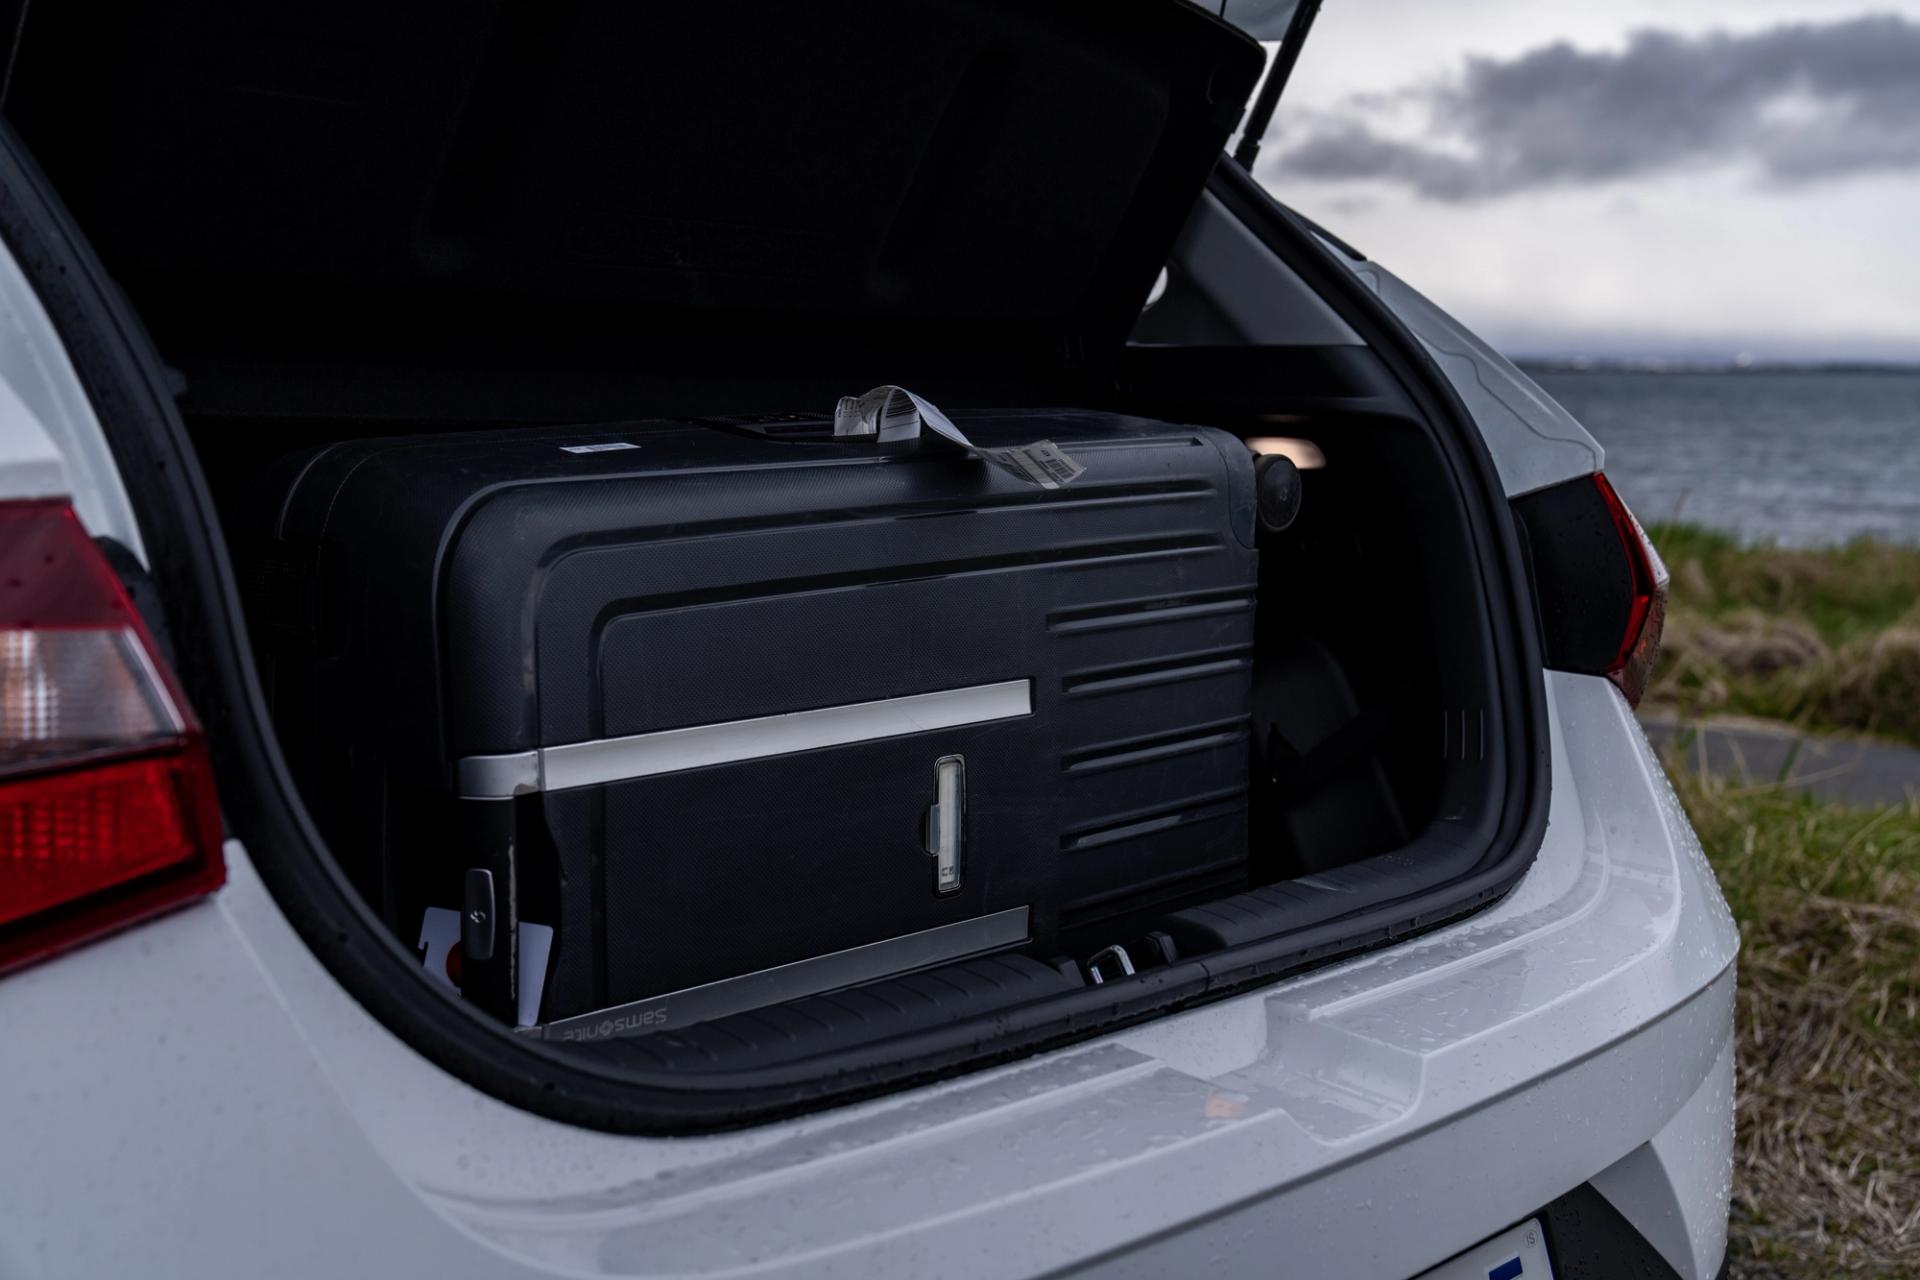 The spacious boot of a Hyundai i20, an ideal car for rental in Iceland, showcasing ample space for luggage and travel essentials